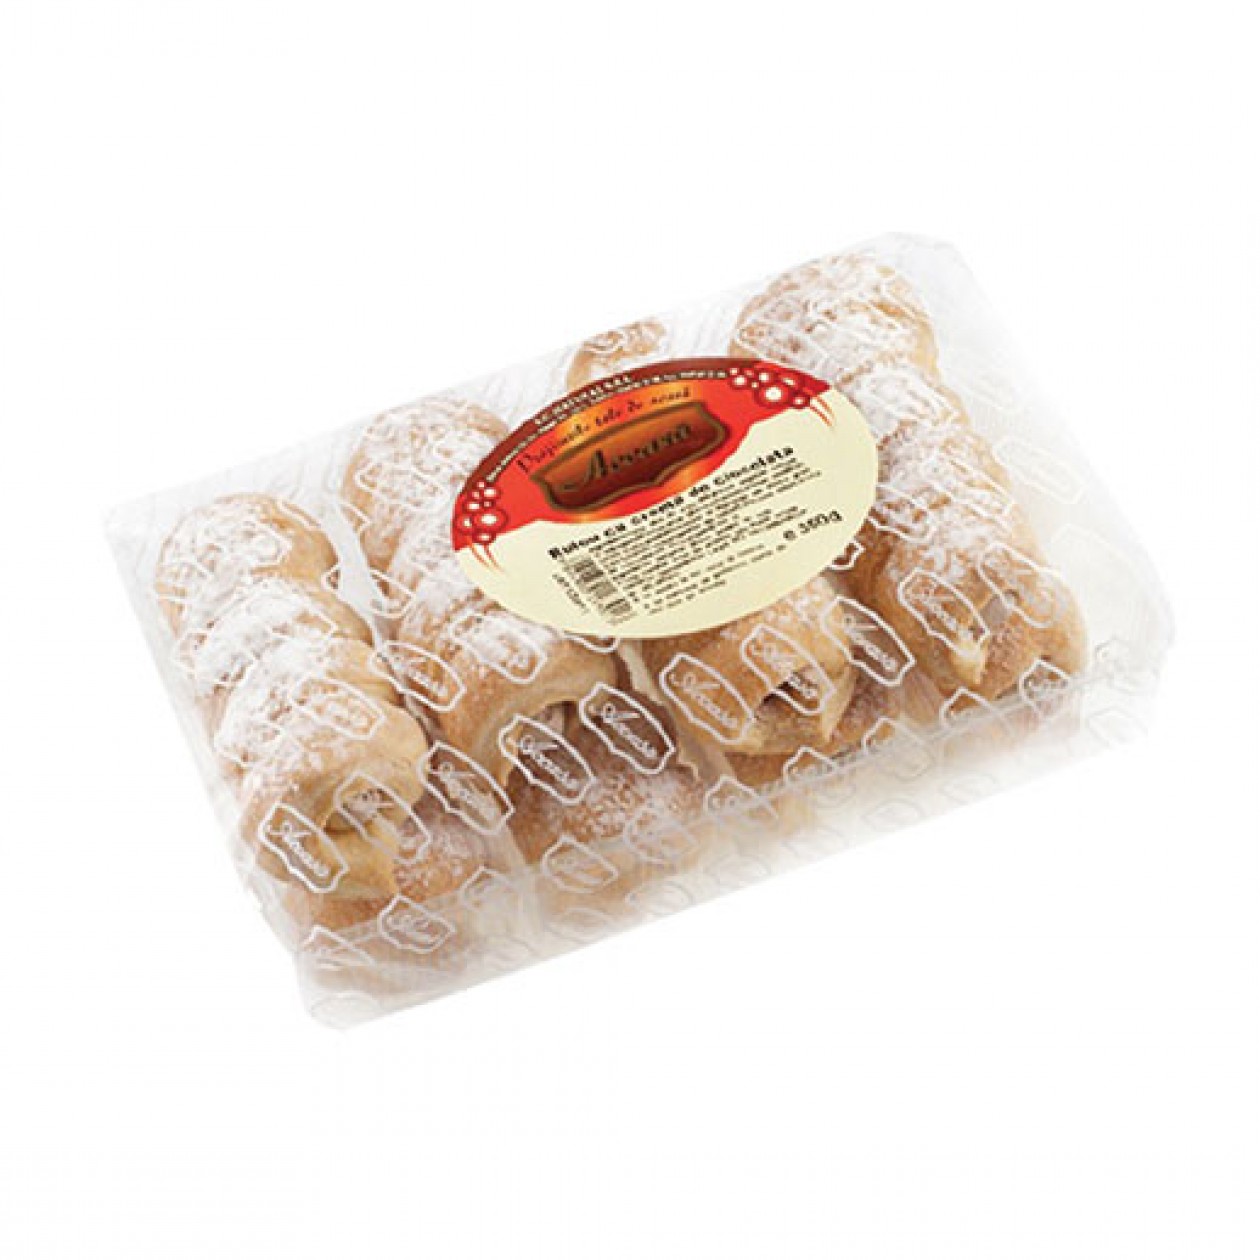 Accasa Puff Pastry Roll With Cocoa Cream 350g